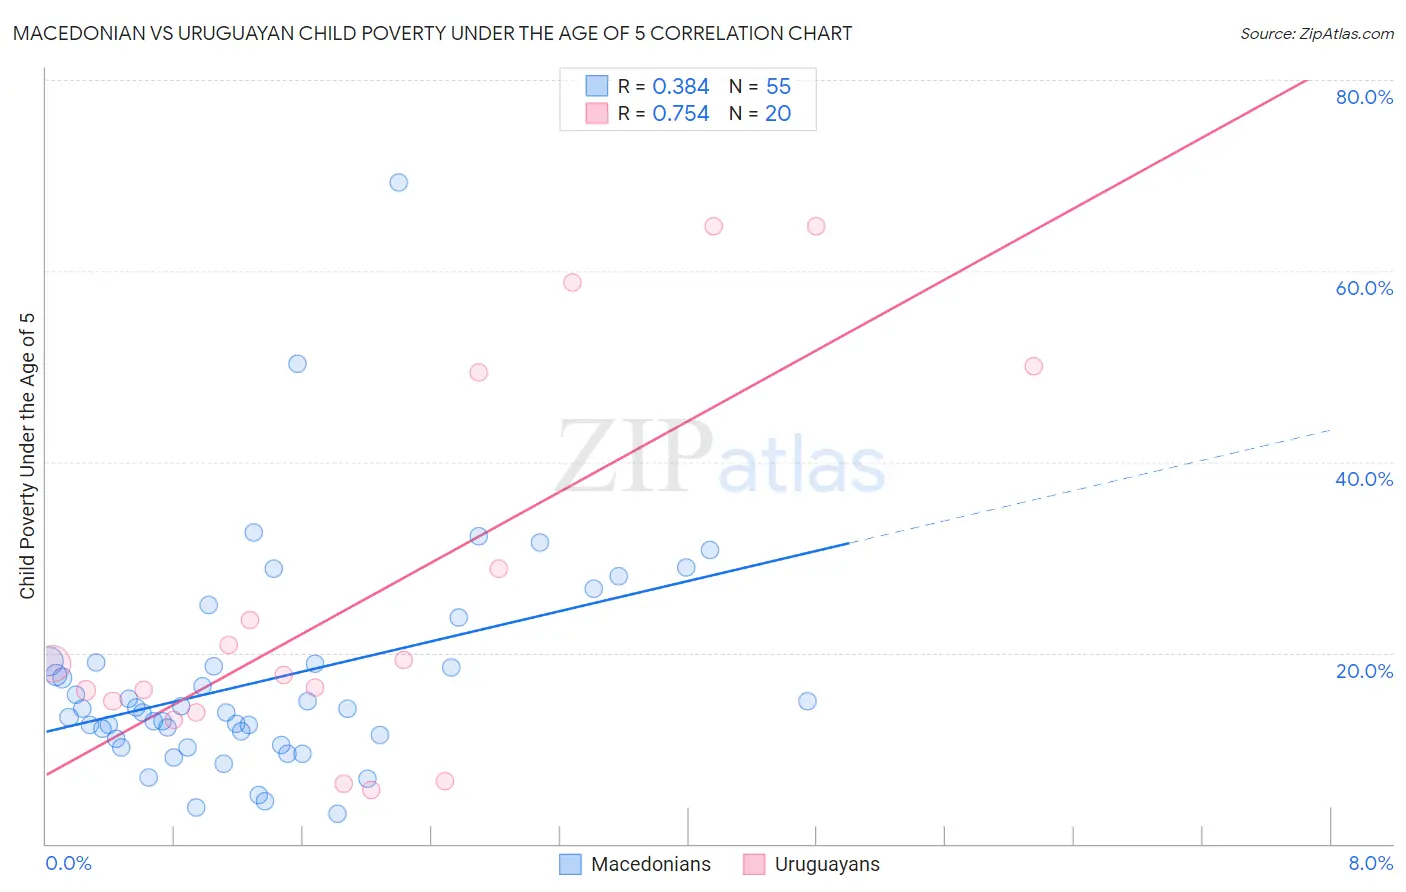 Macedonian vs Uruguayan Child Poverty Under the Age of 5